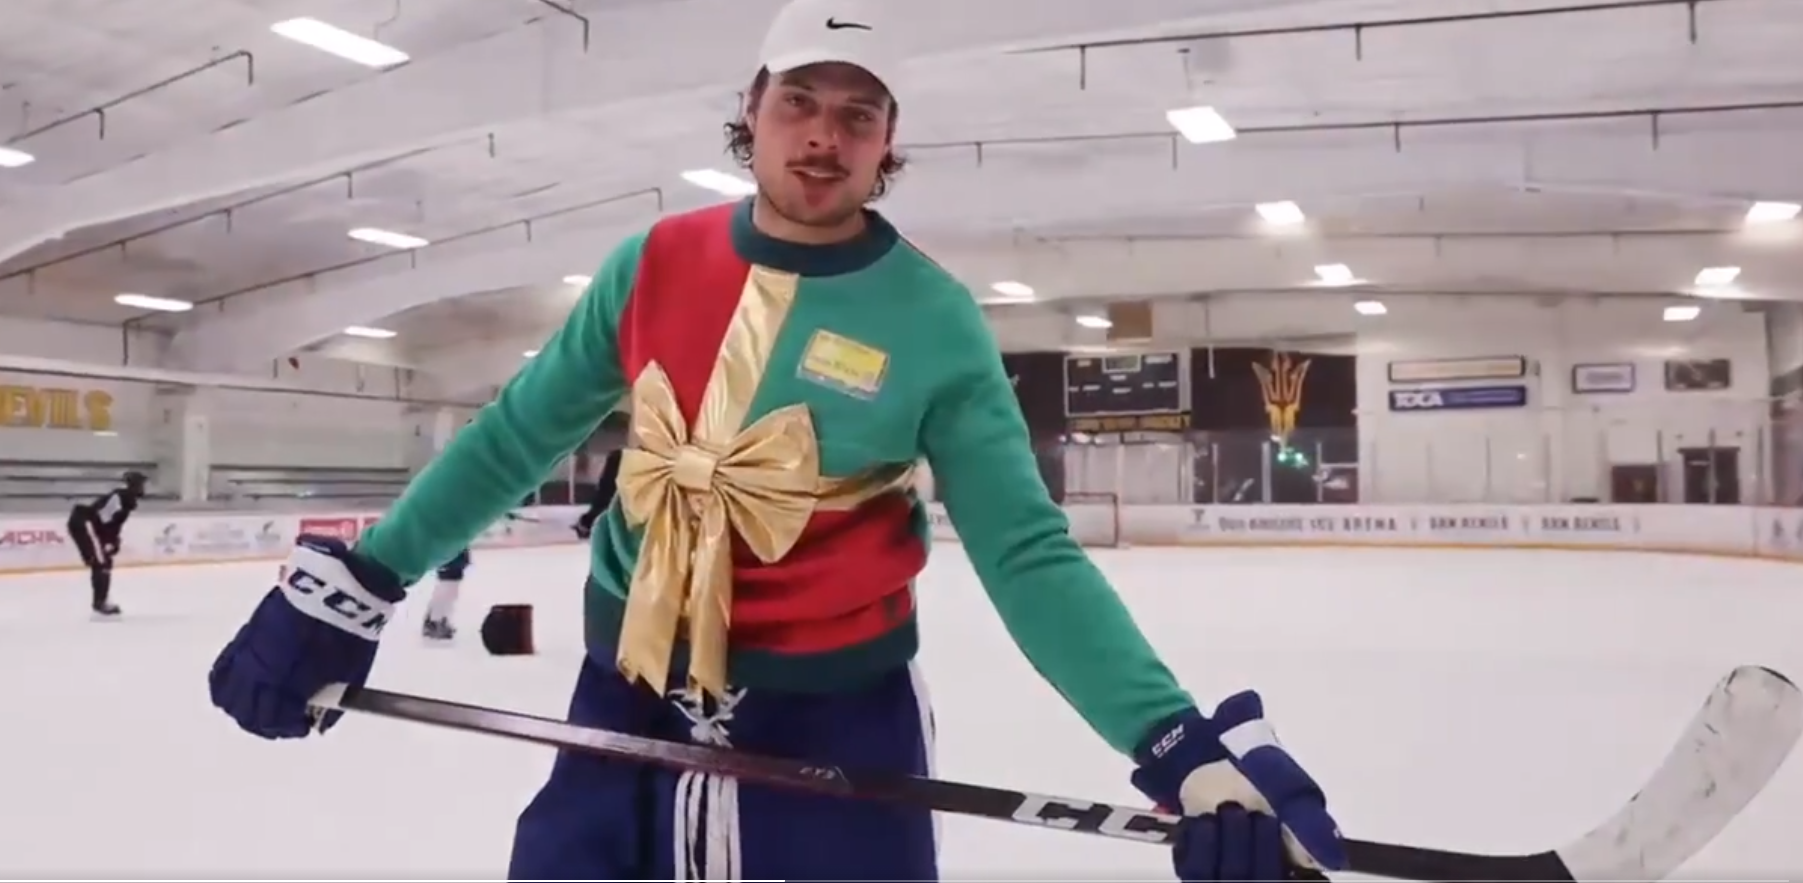 The Leafs wore Ryan Reynolds' ugly Christmas sweater for practice in  support of SickKids - Article - Bardown